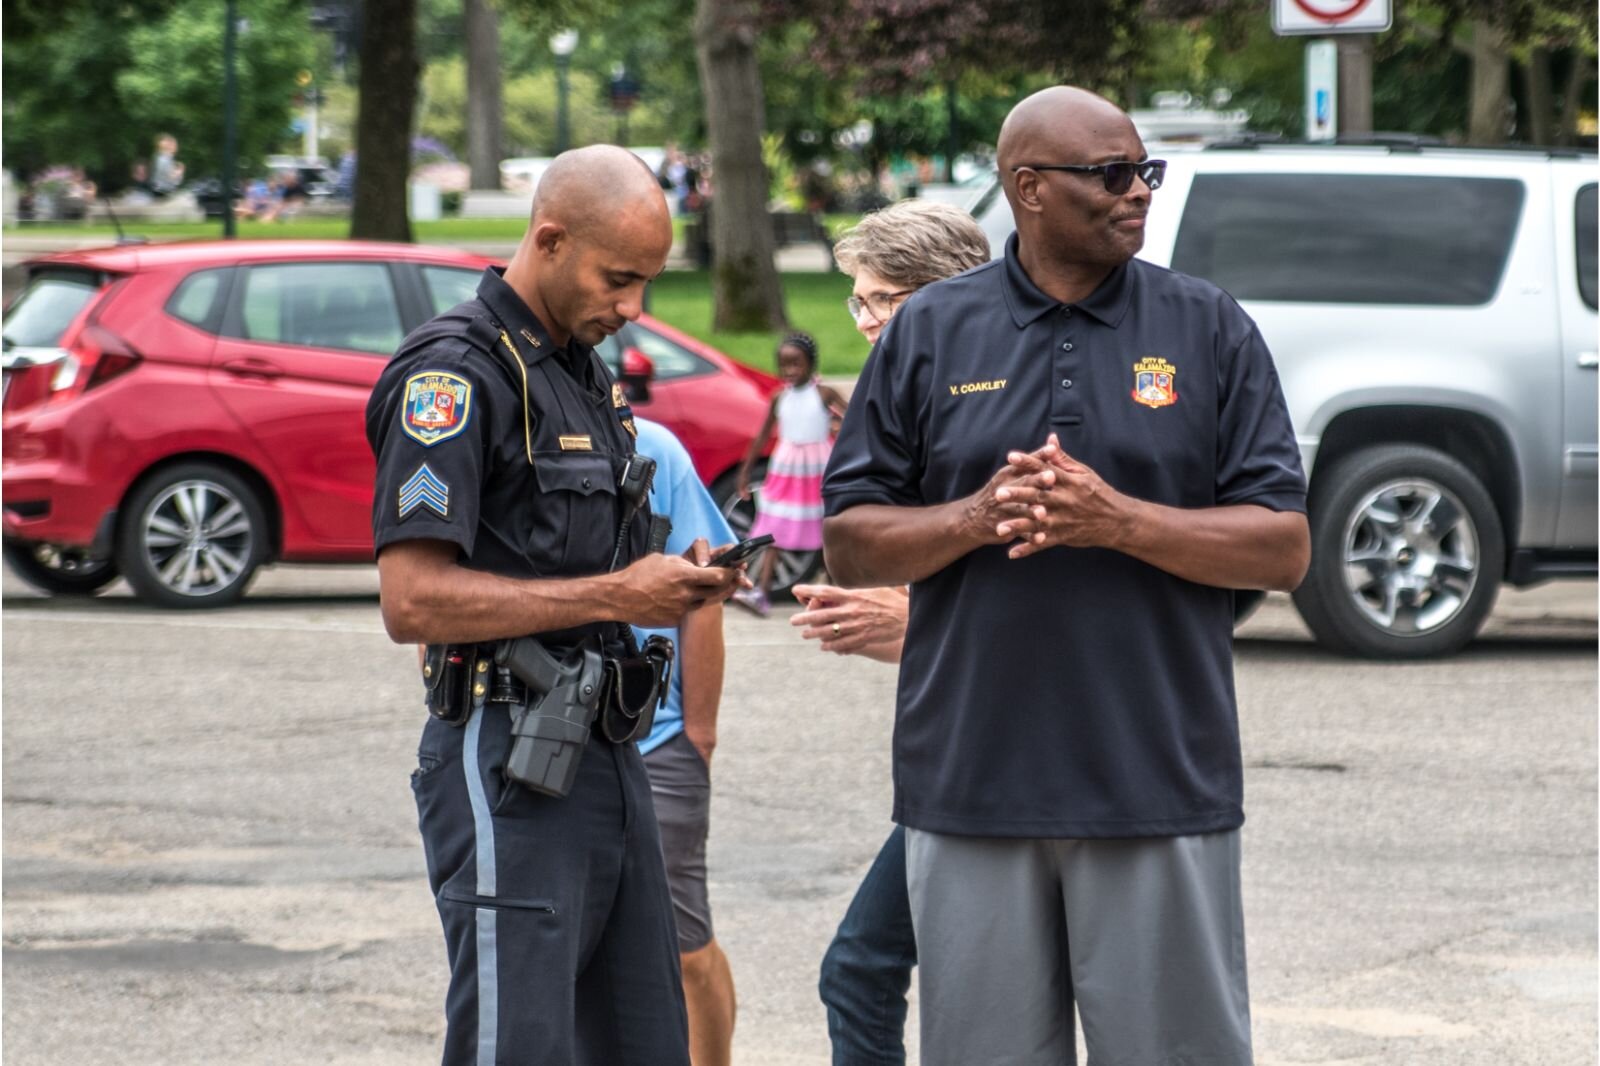 Kalamazoo Department of Safety Chief Vernon Coakley watches the children enjoying the Children's Nature Playscape along with Sgt. Andrew Werkema, head of the Community Policing Unit.